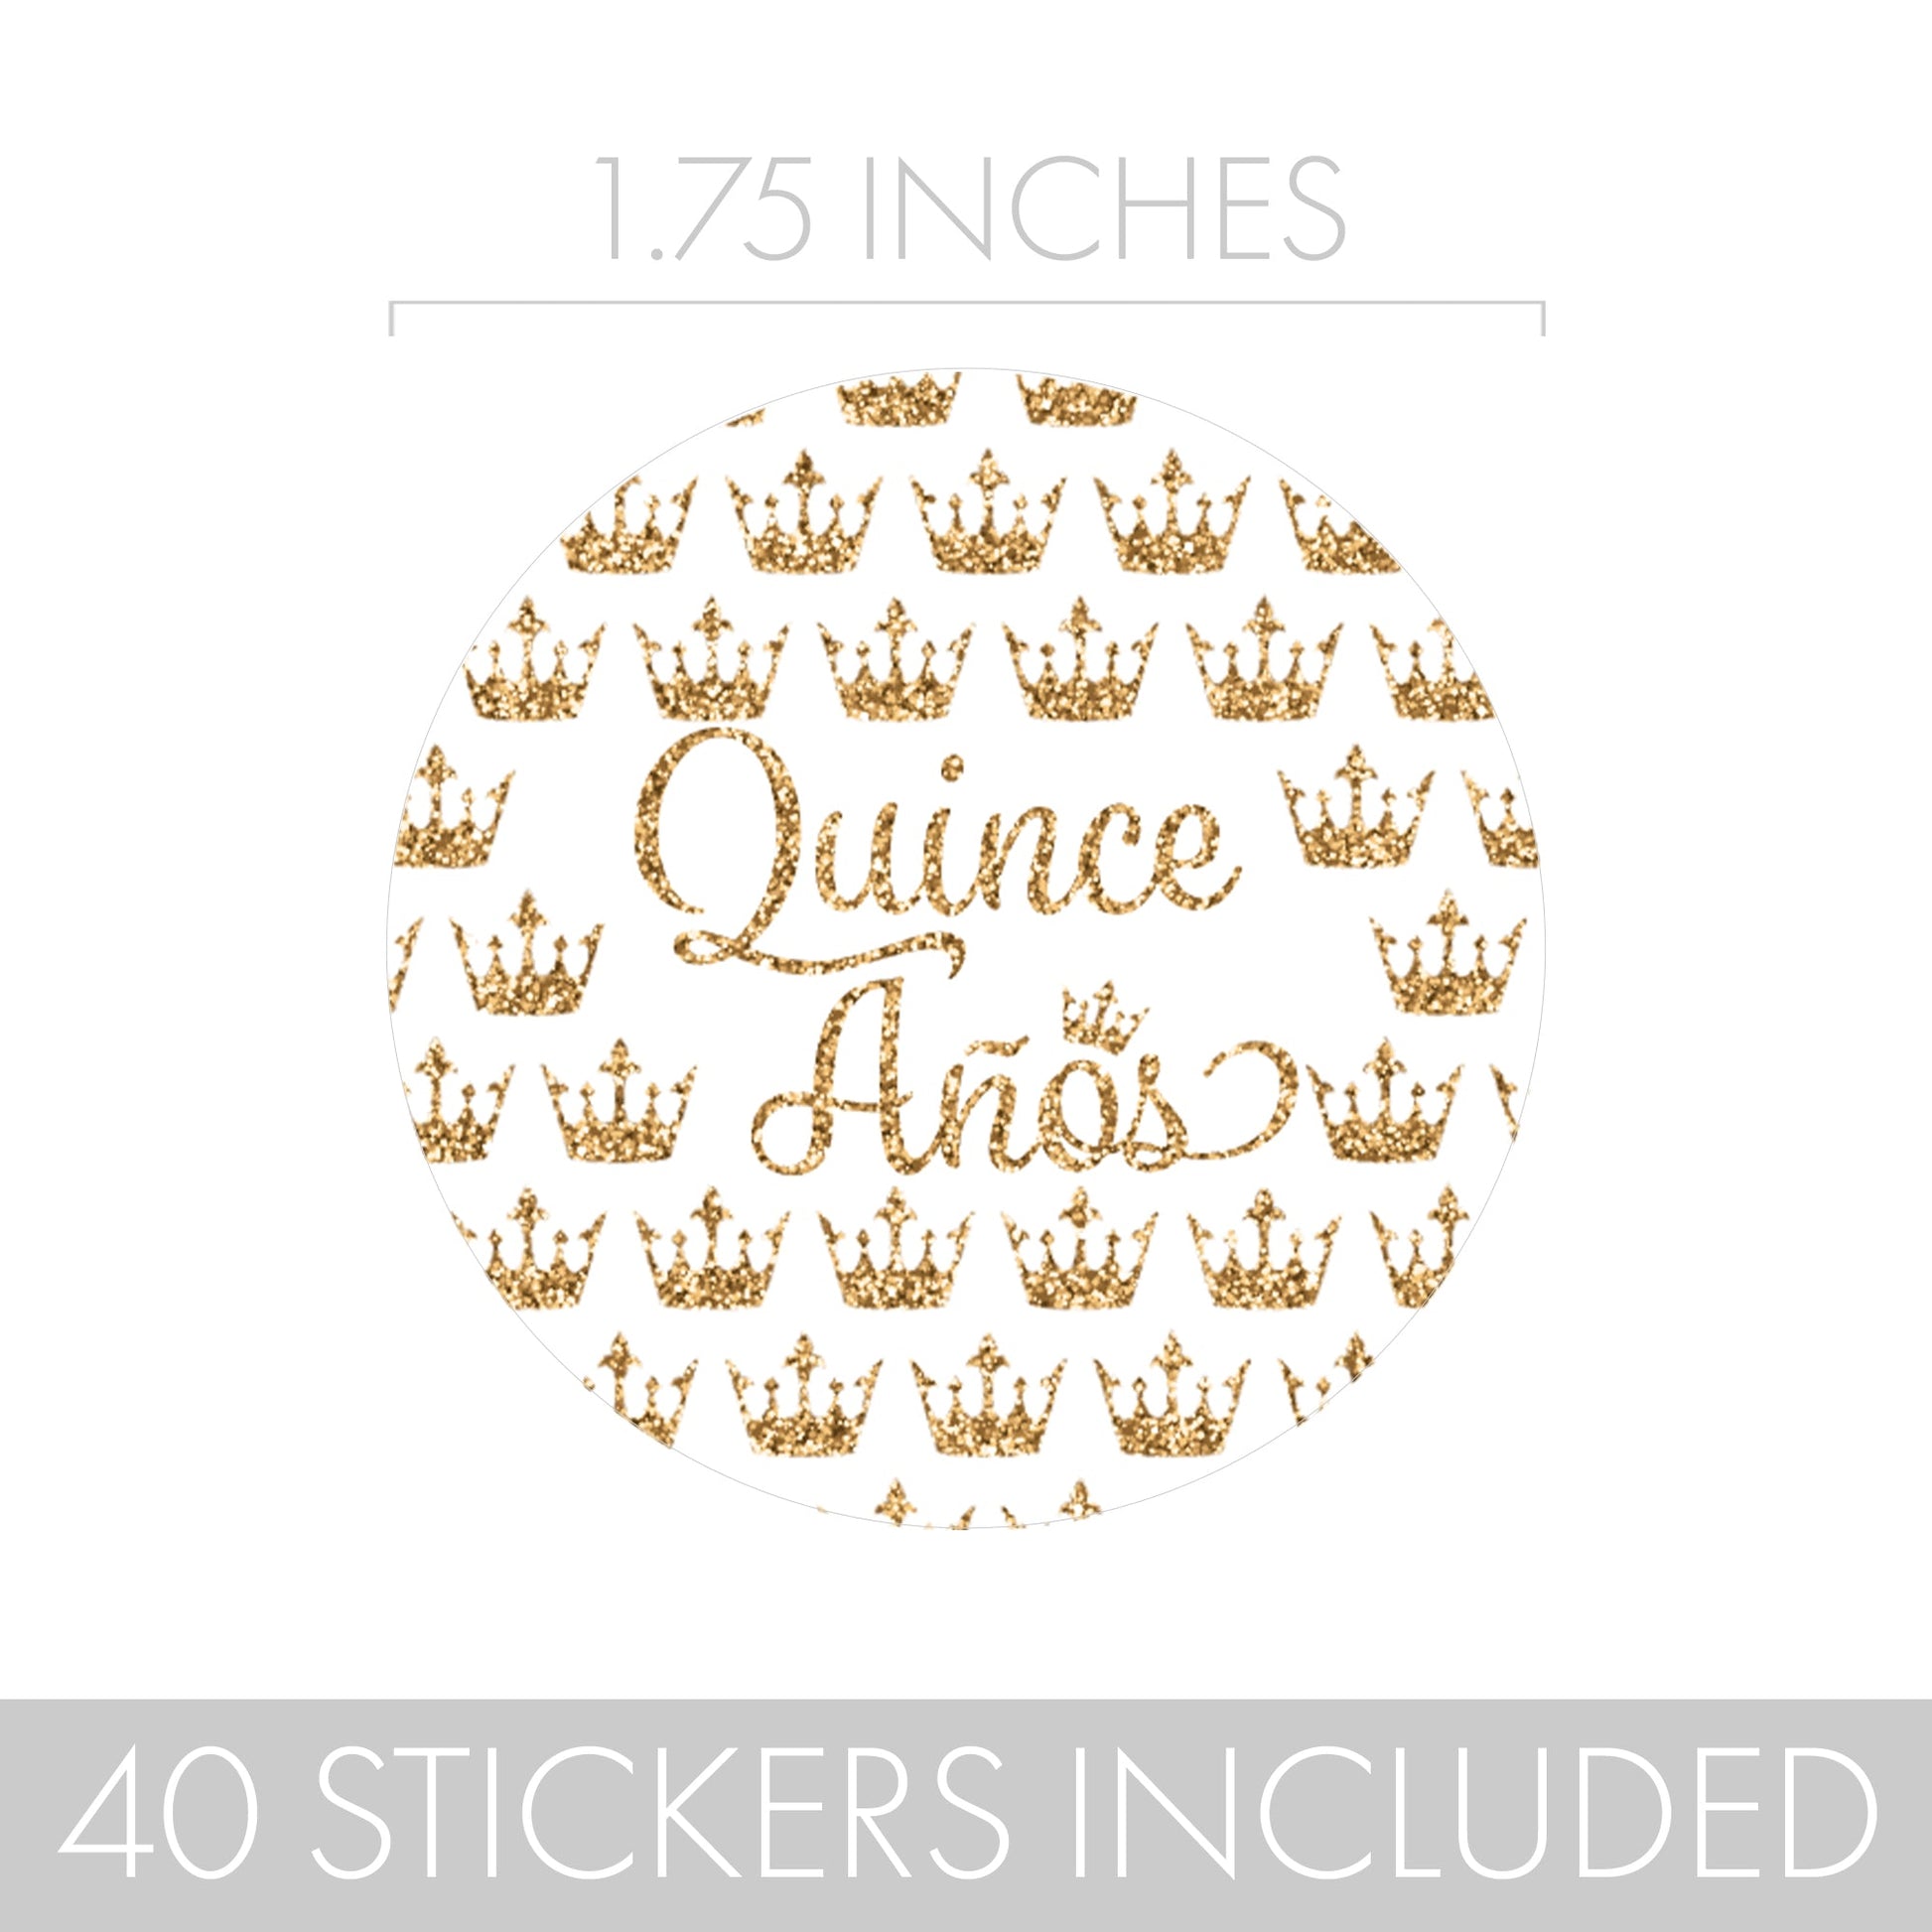 White and gold embellishments for your quinceañera favors - 40 stickers included.